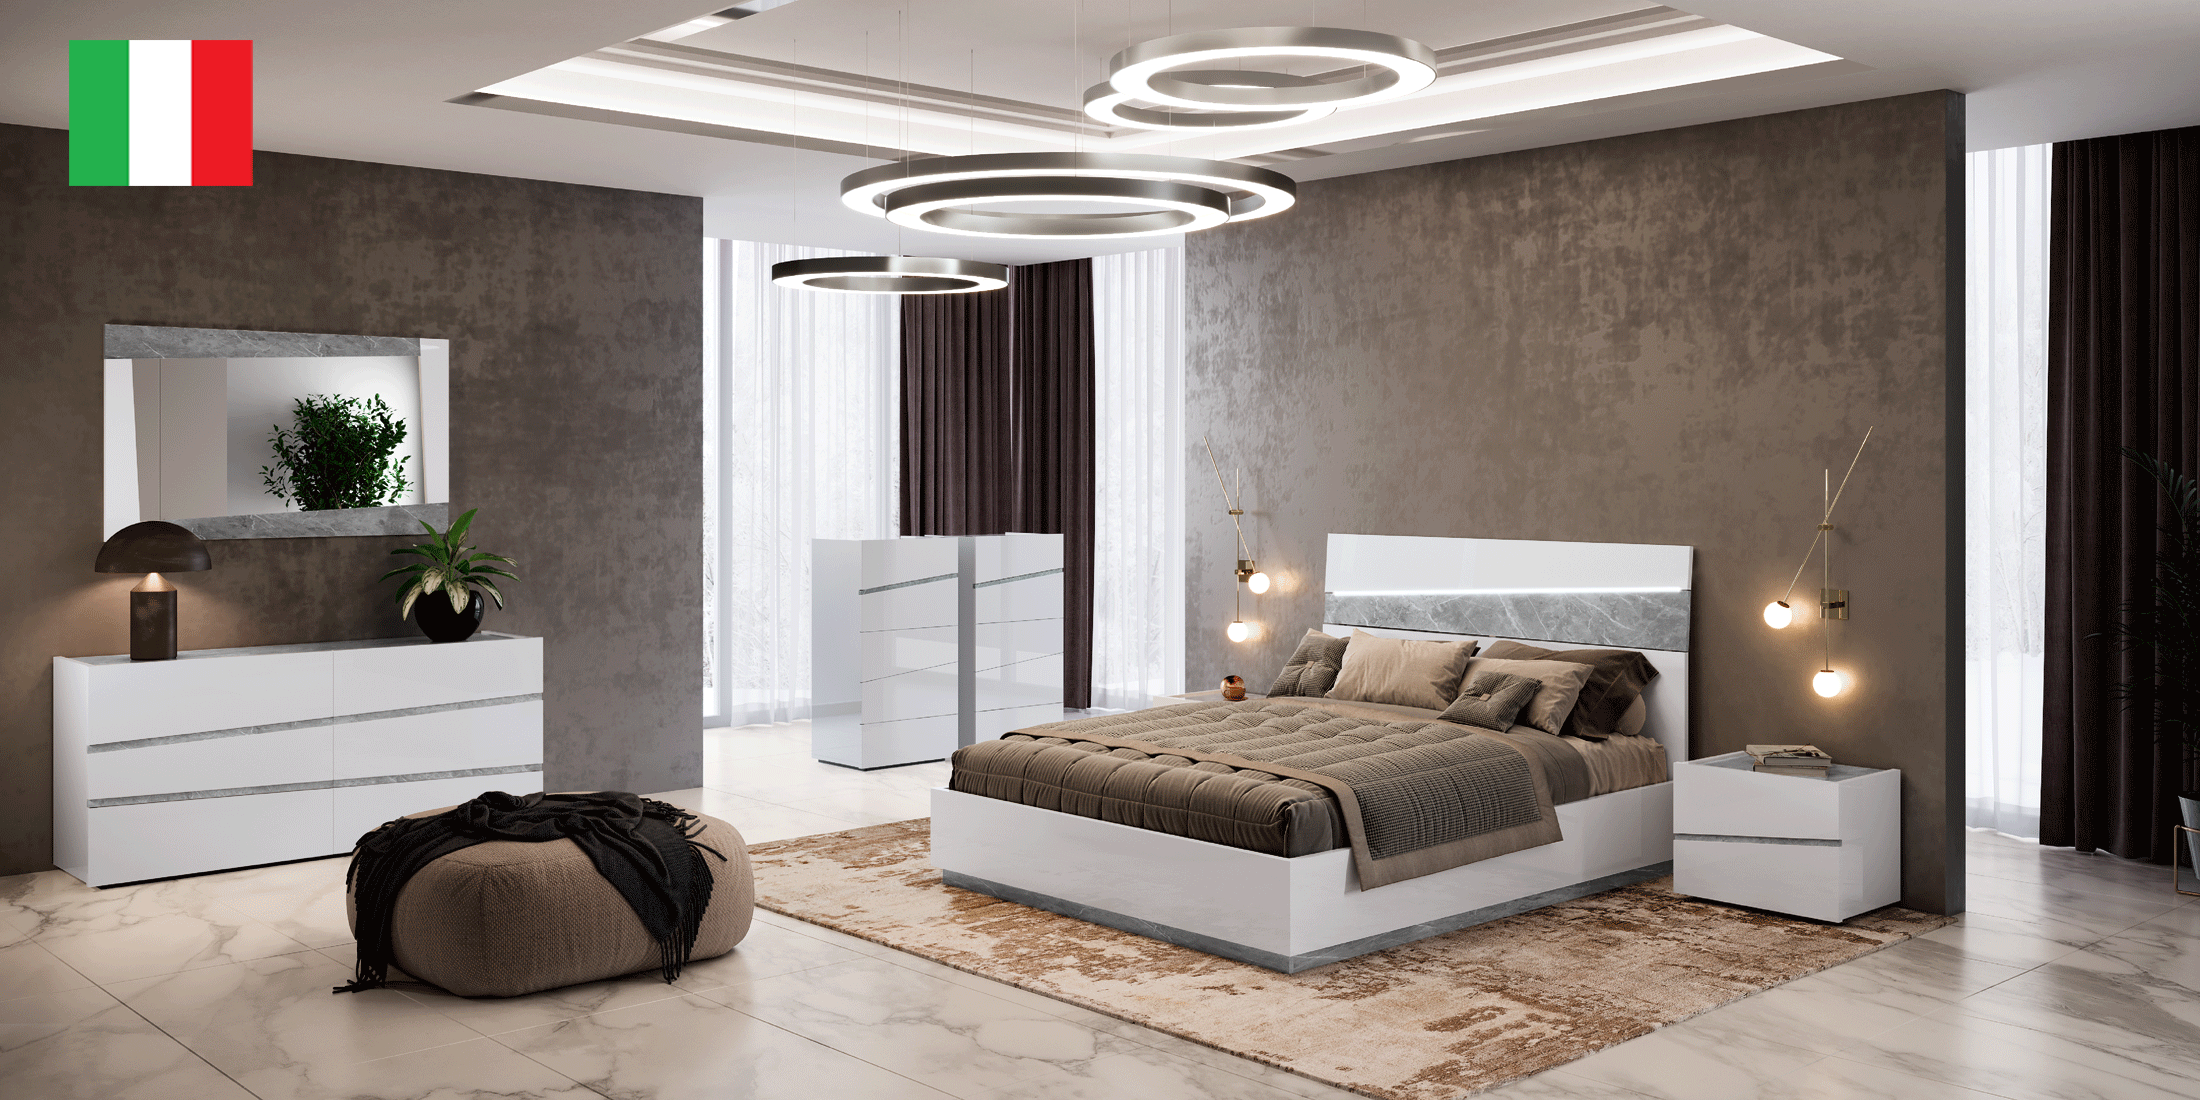 Bedroom Furniture Beds Alba Bedroom w/ Light by Camelgroup – Italy